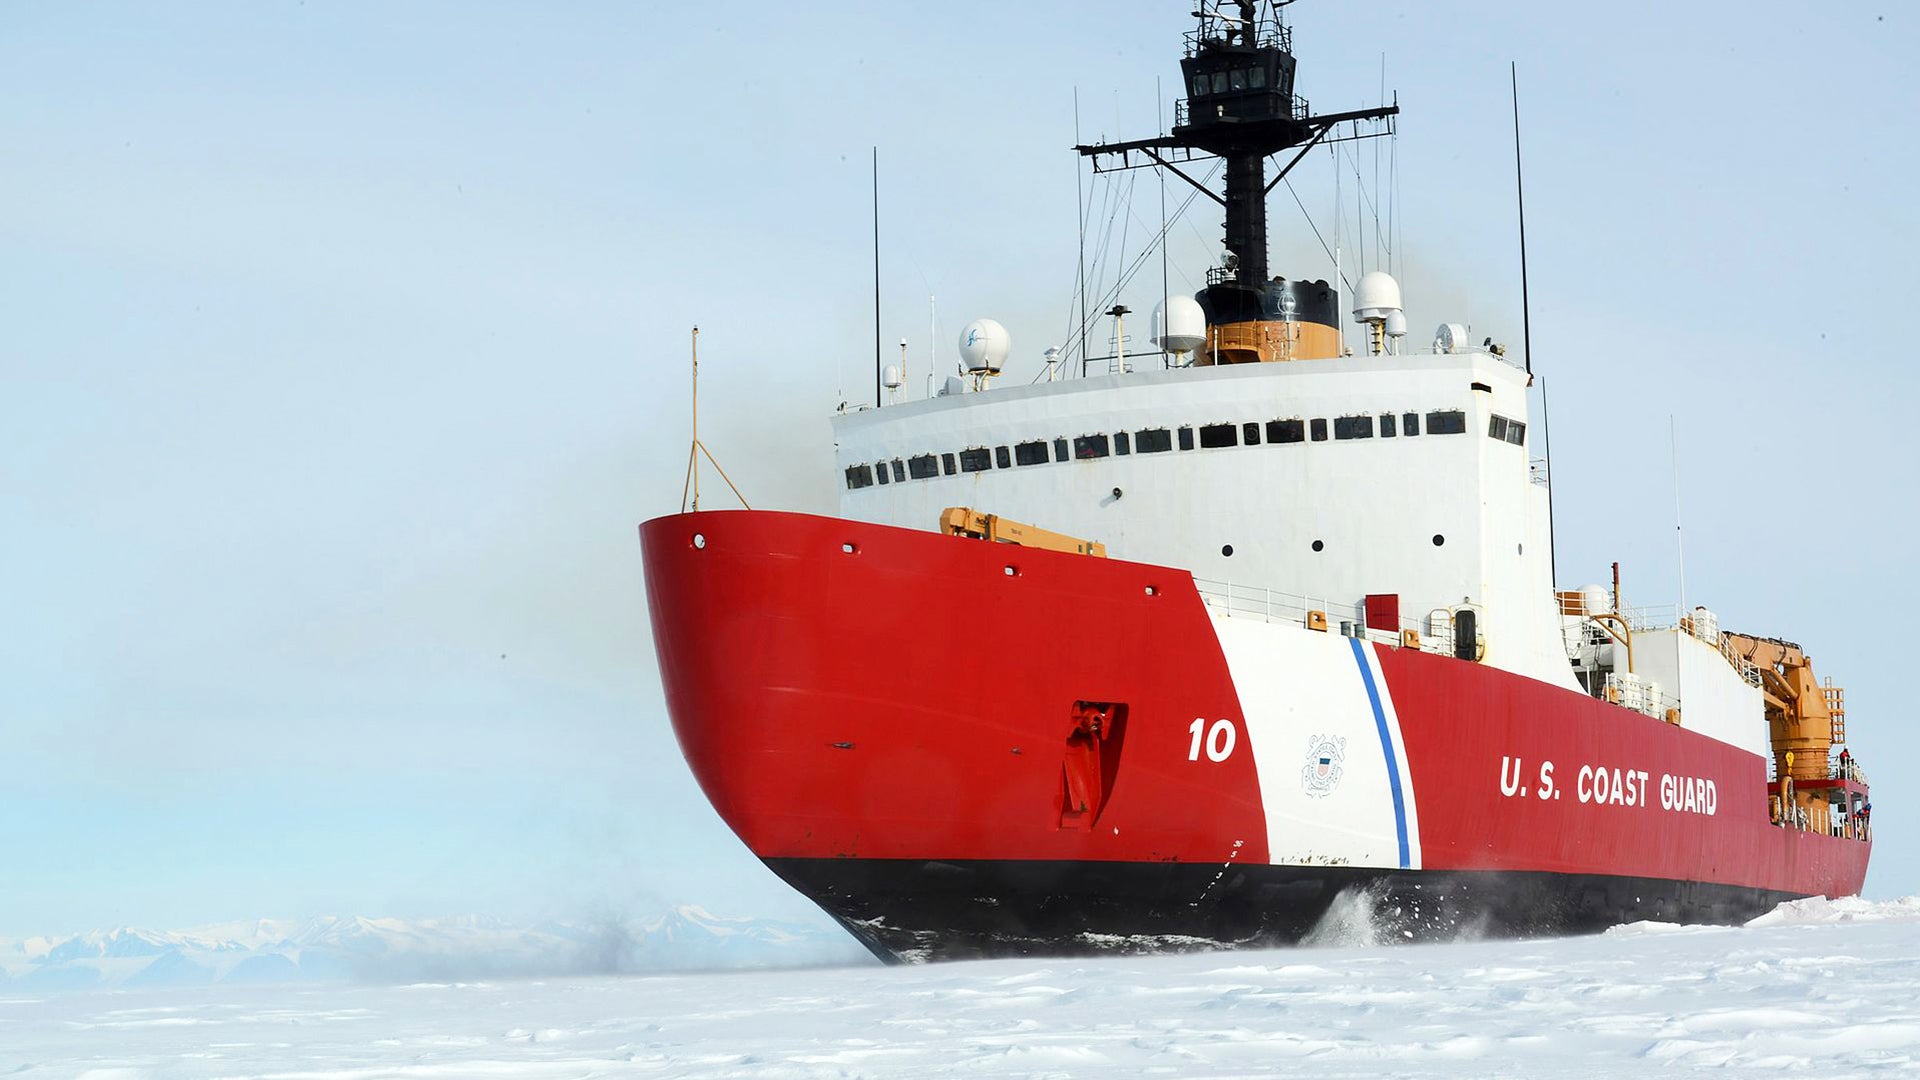 Now The U.S. Coast Guard Wants Cruise Missiles On Its Icebreakers Too